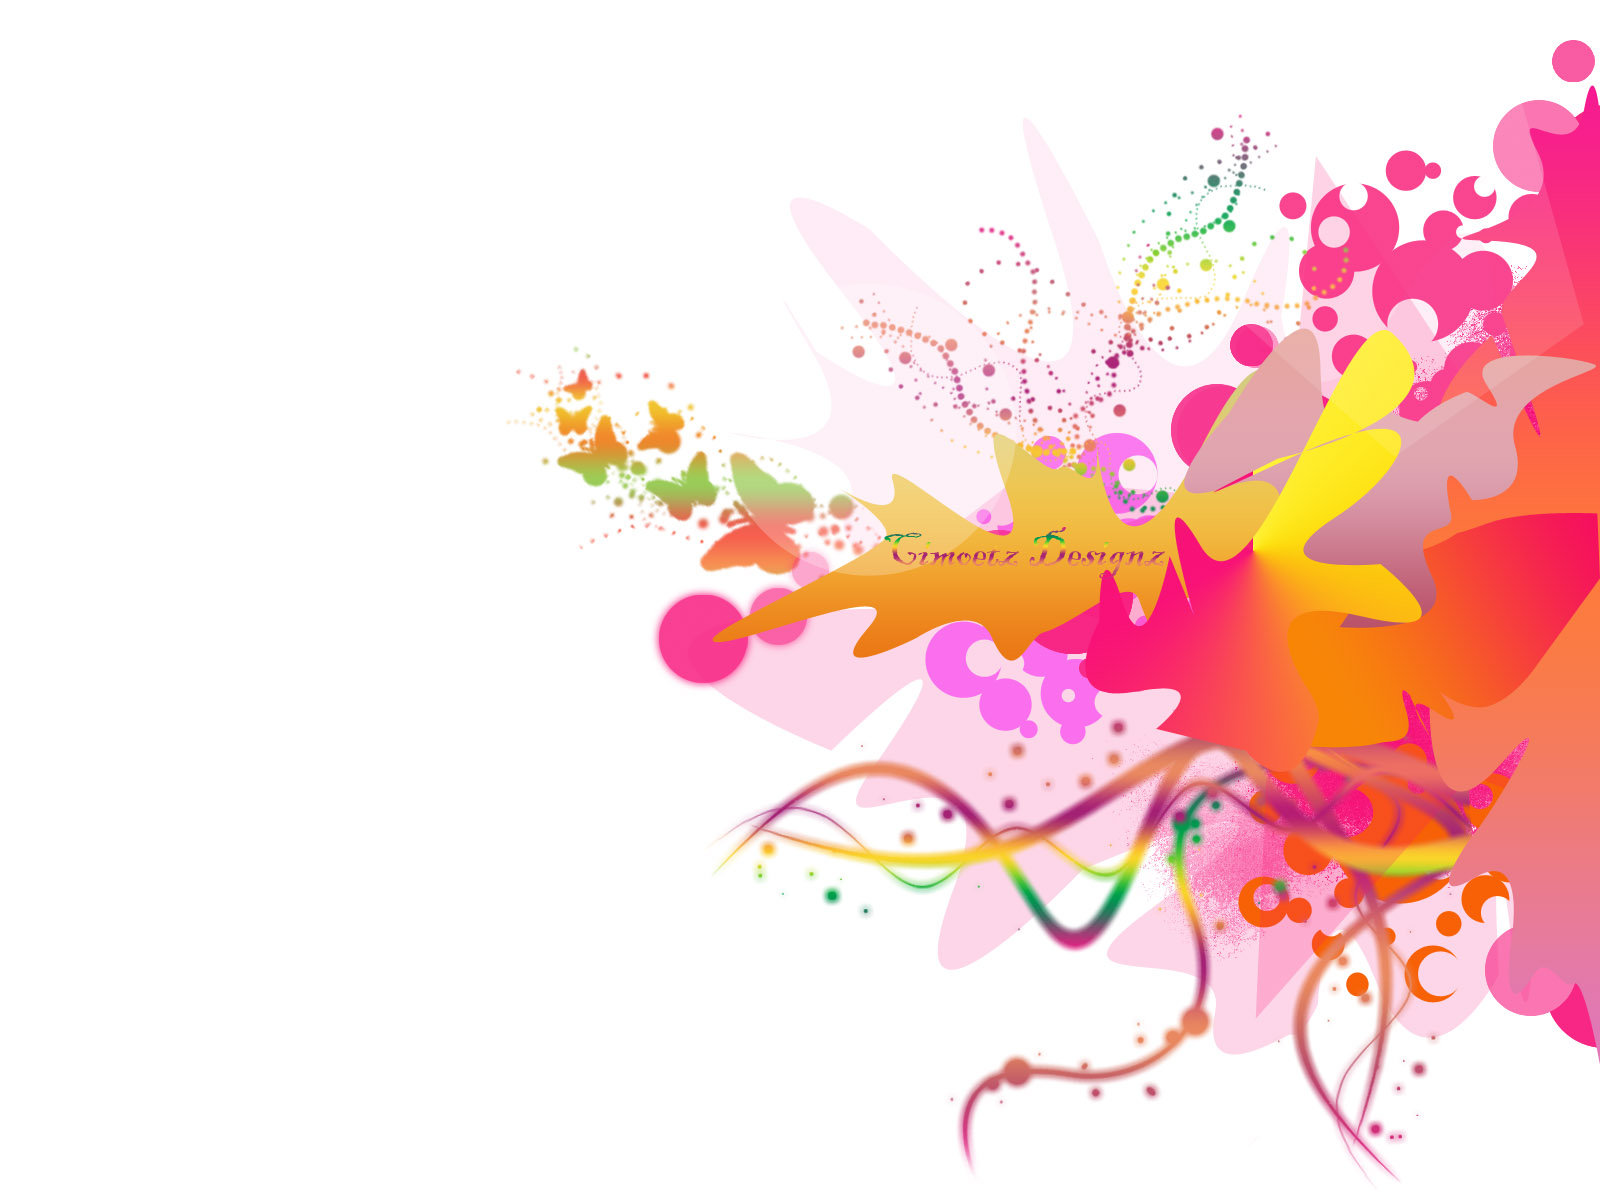 Sprinkle Bloomy Design Colorful Power Point Background